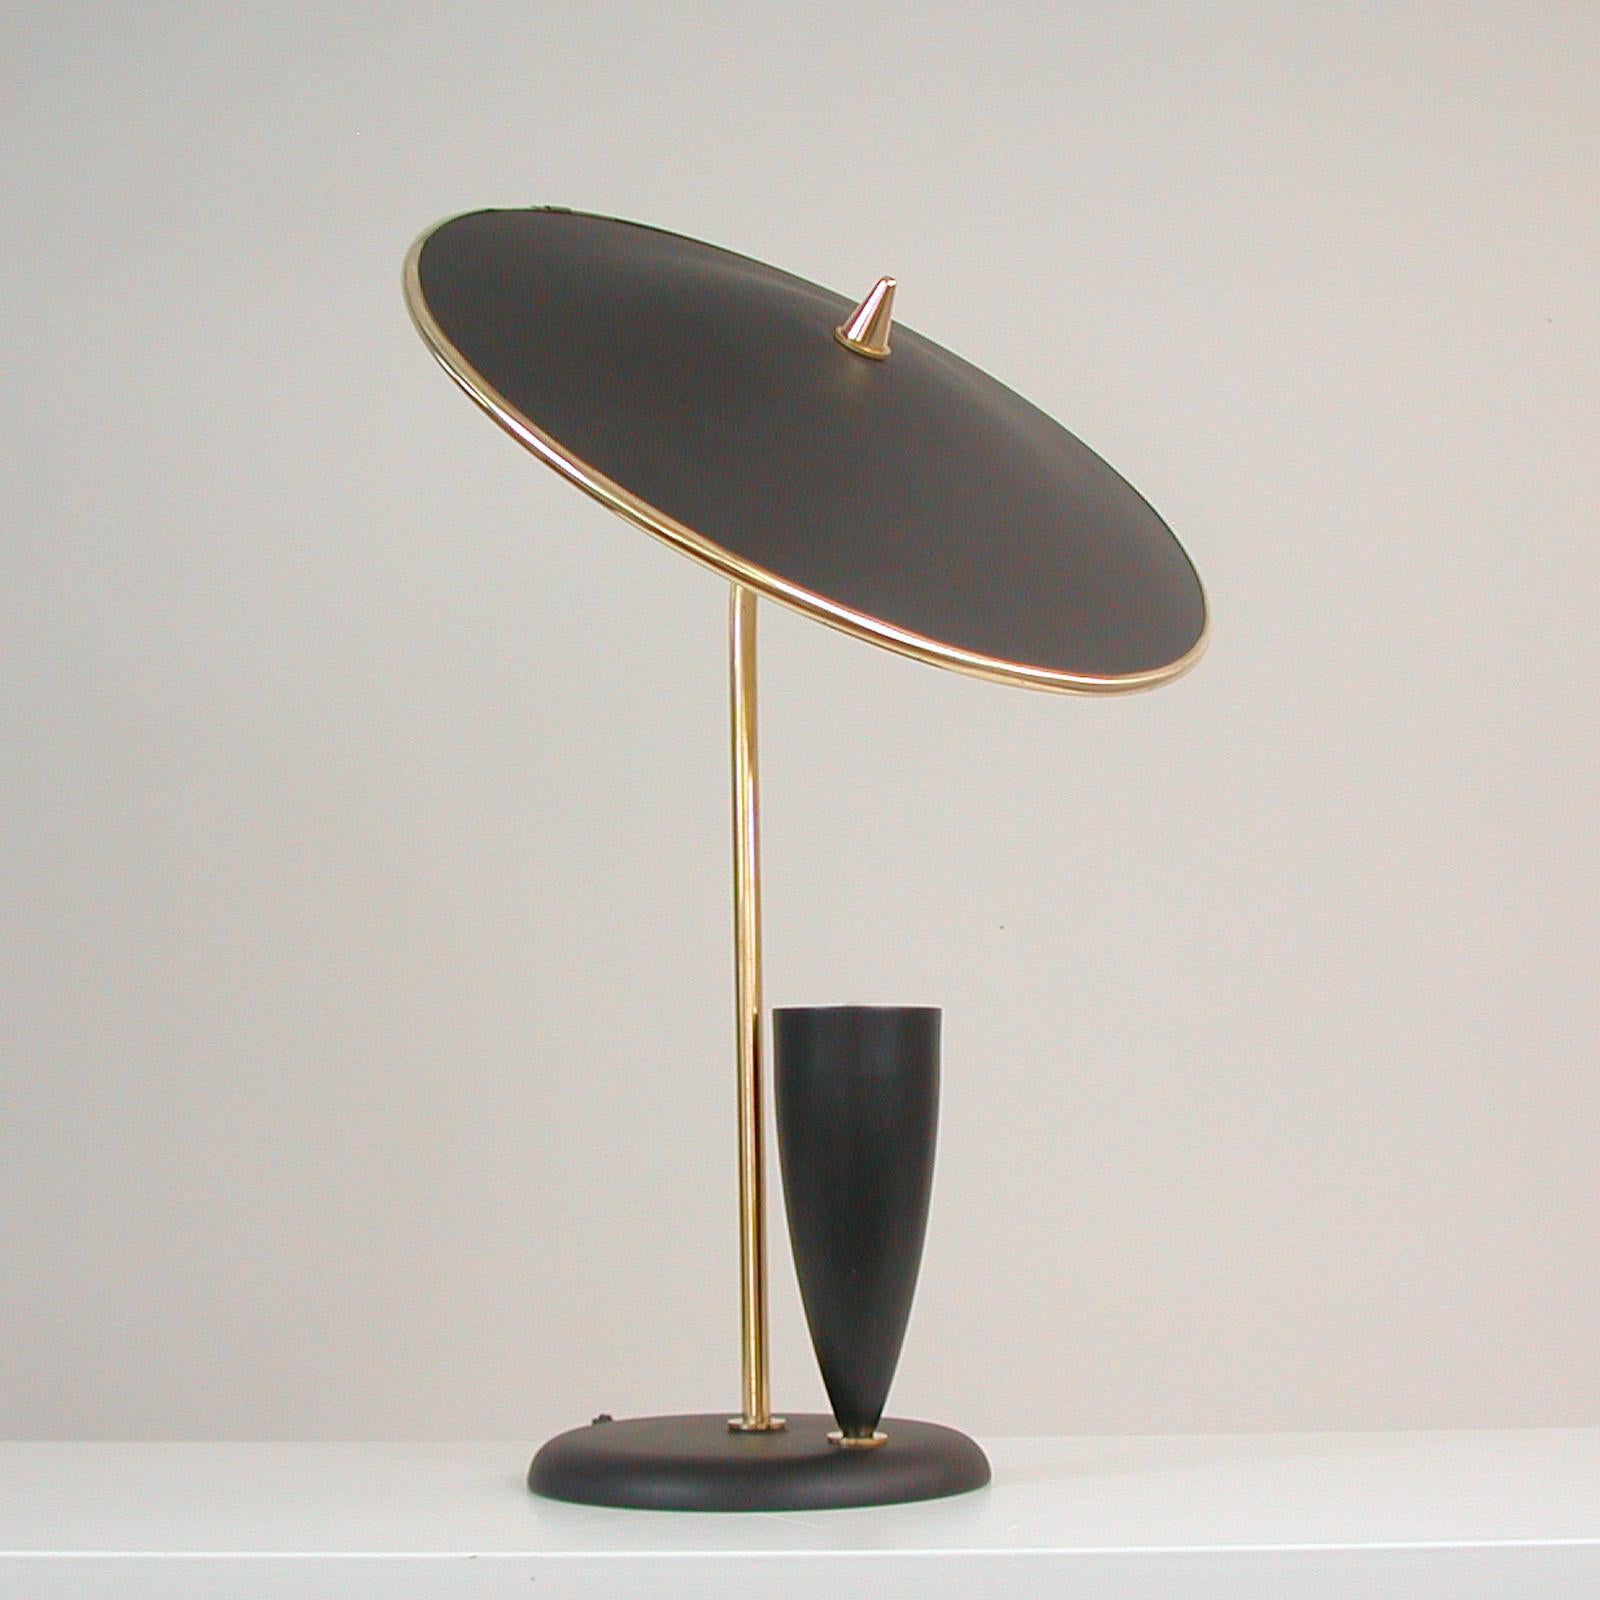 French Midcentury Reflecting Black and Brass Table Lamp, 1950s For Sale 7